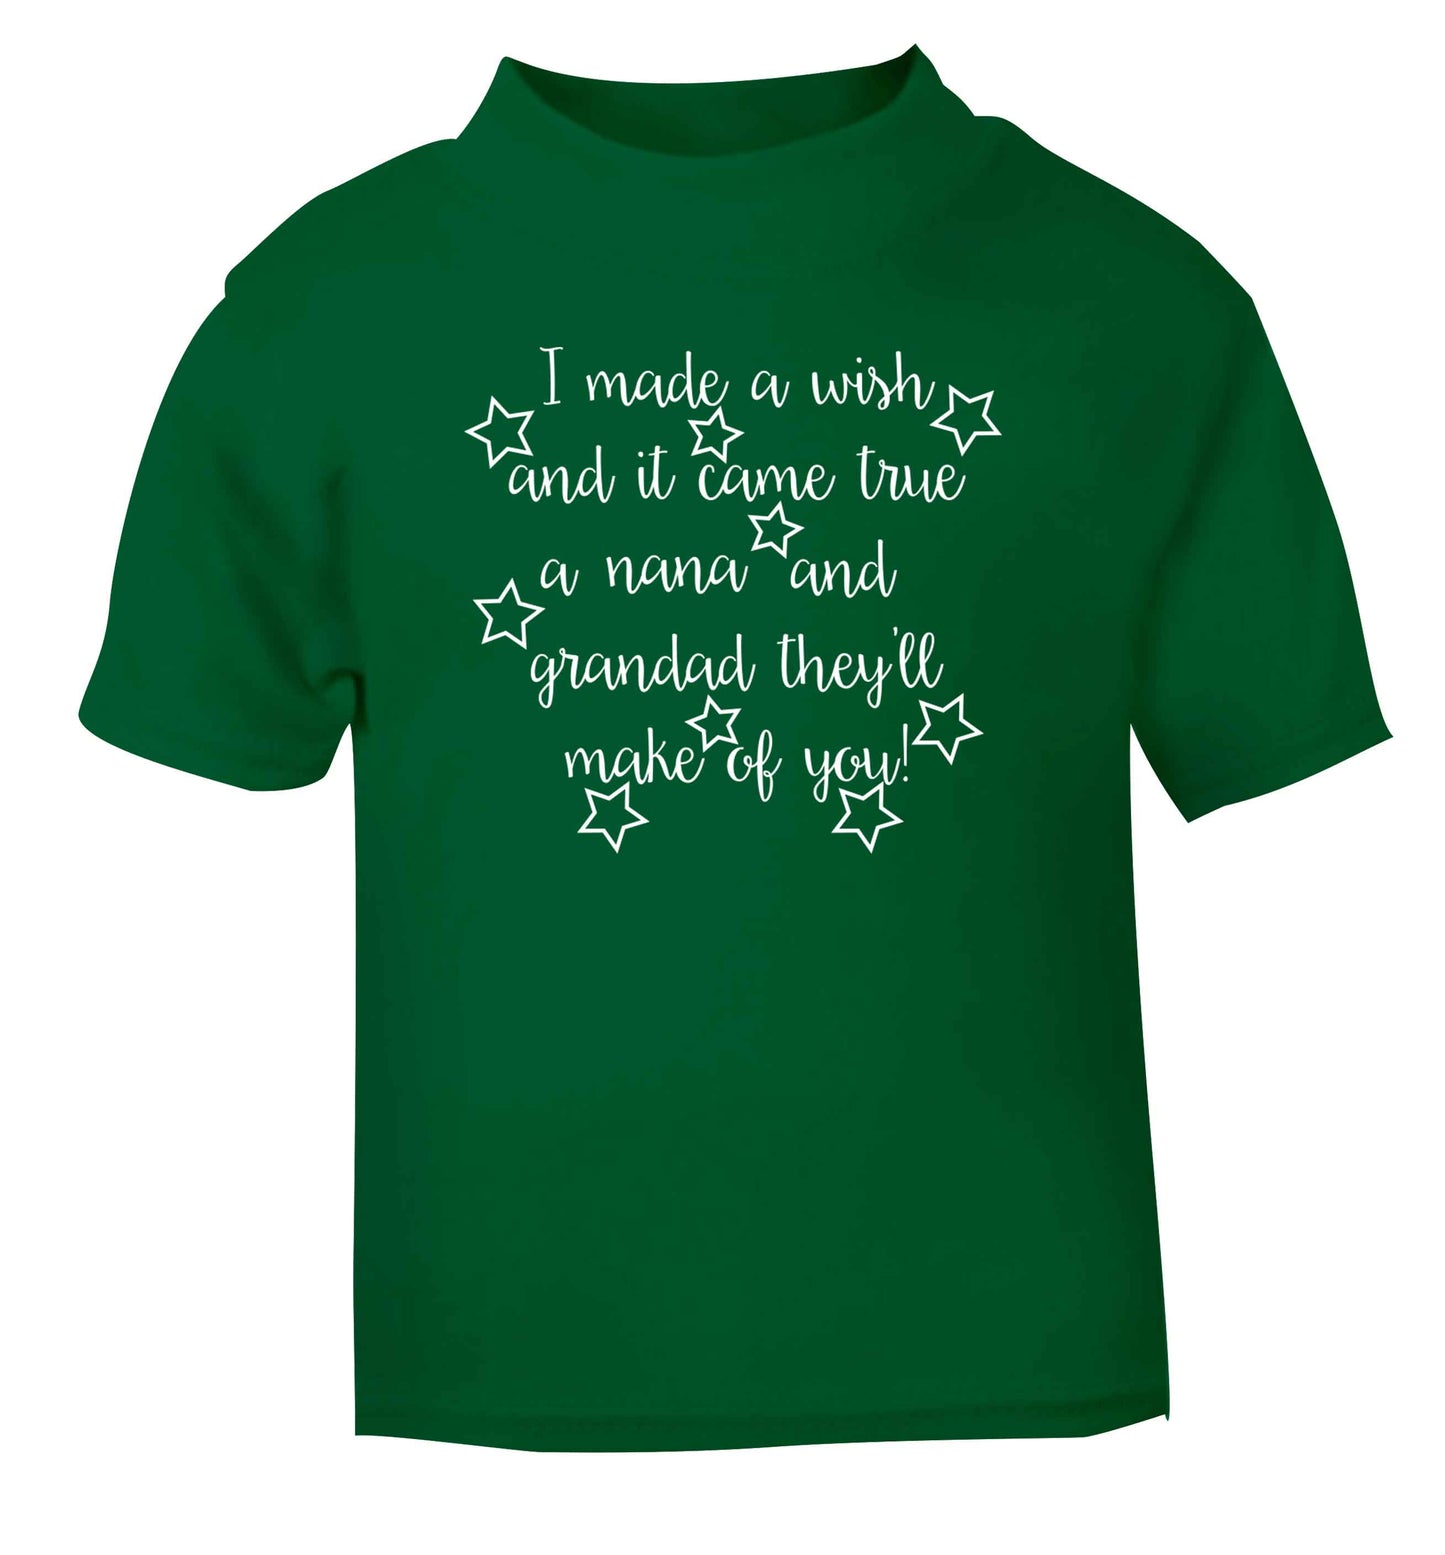 I made a wish and it came true a nana and grandad they'll make of you! green Baby Toddler Tshirt 2 Years